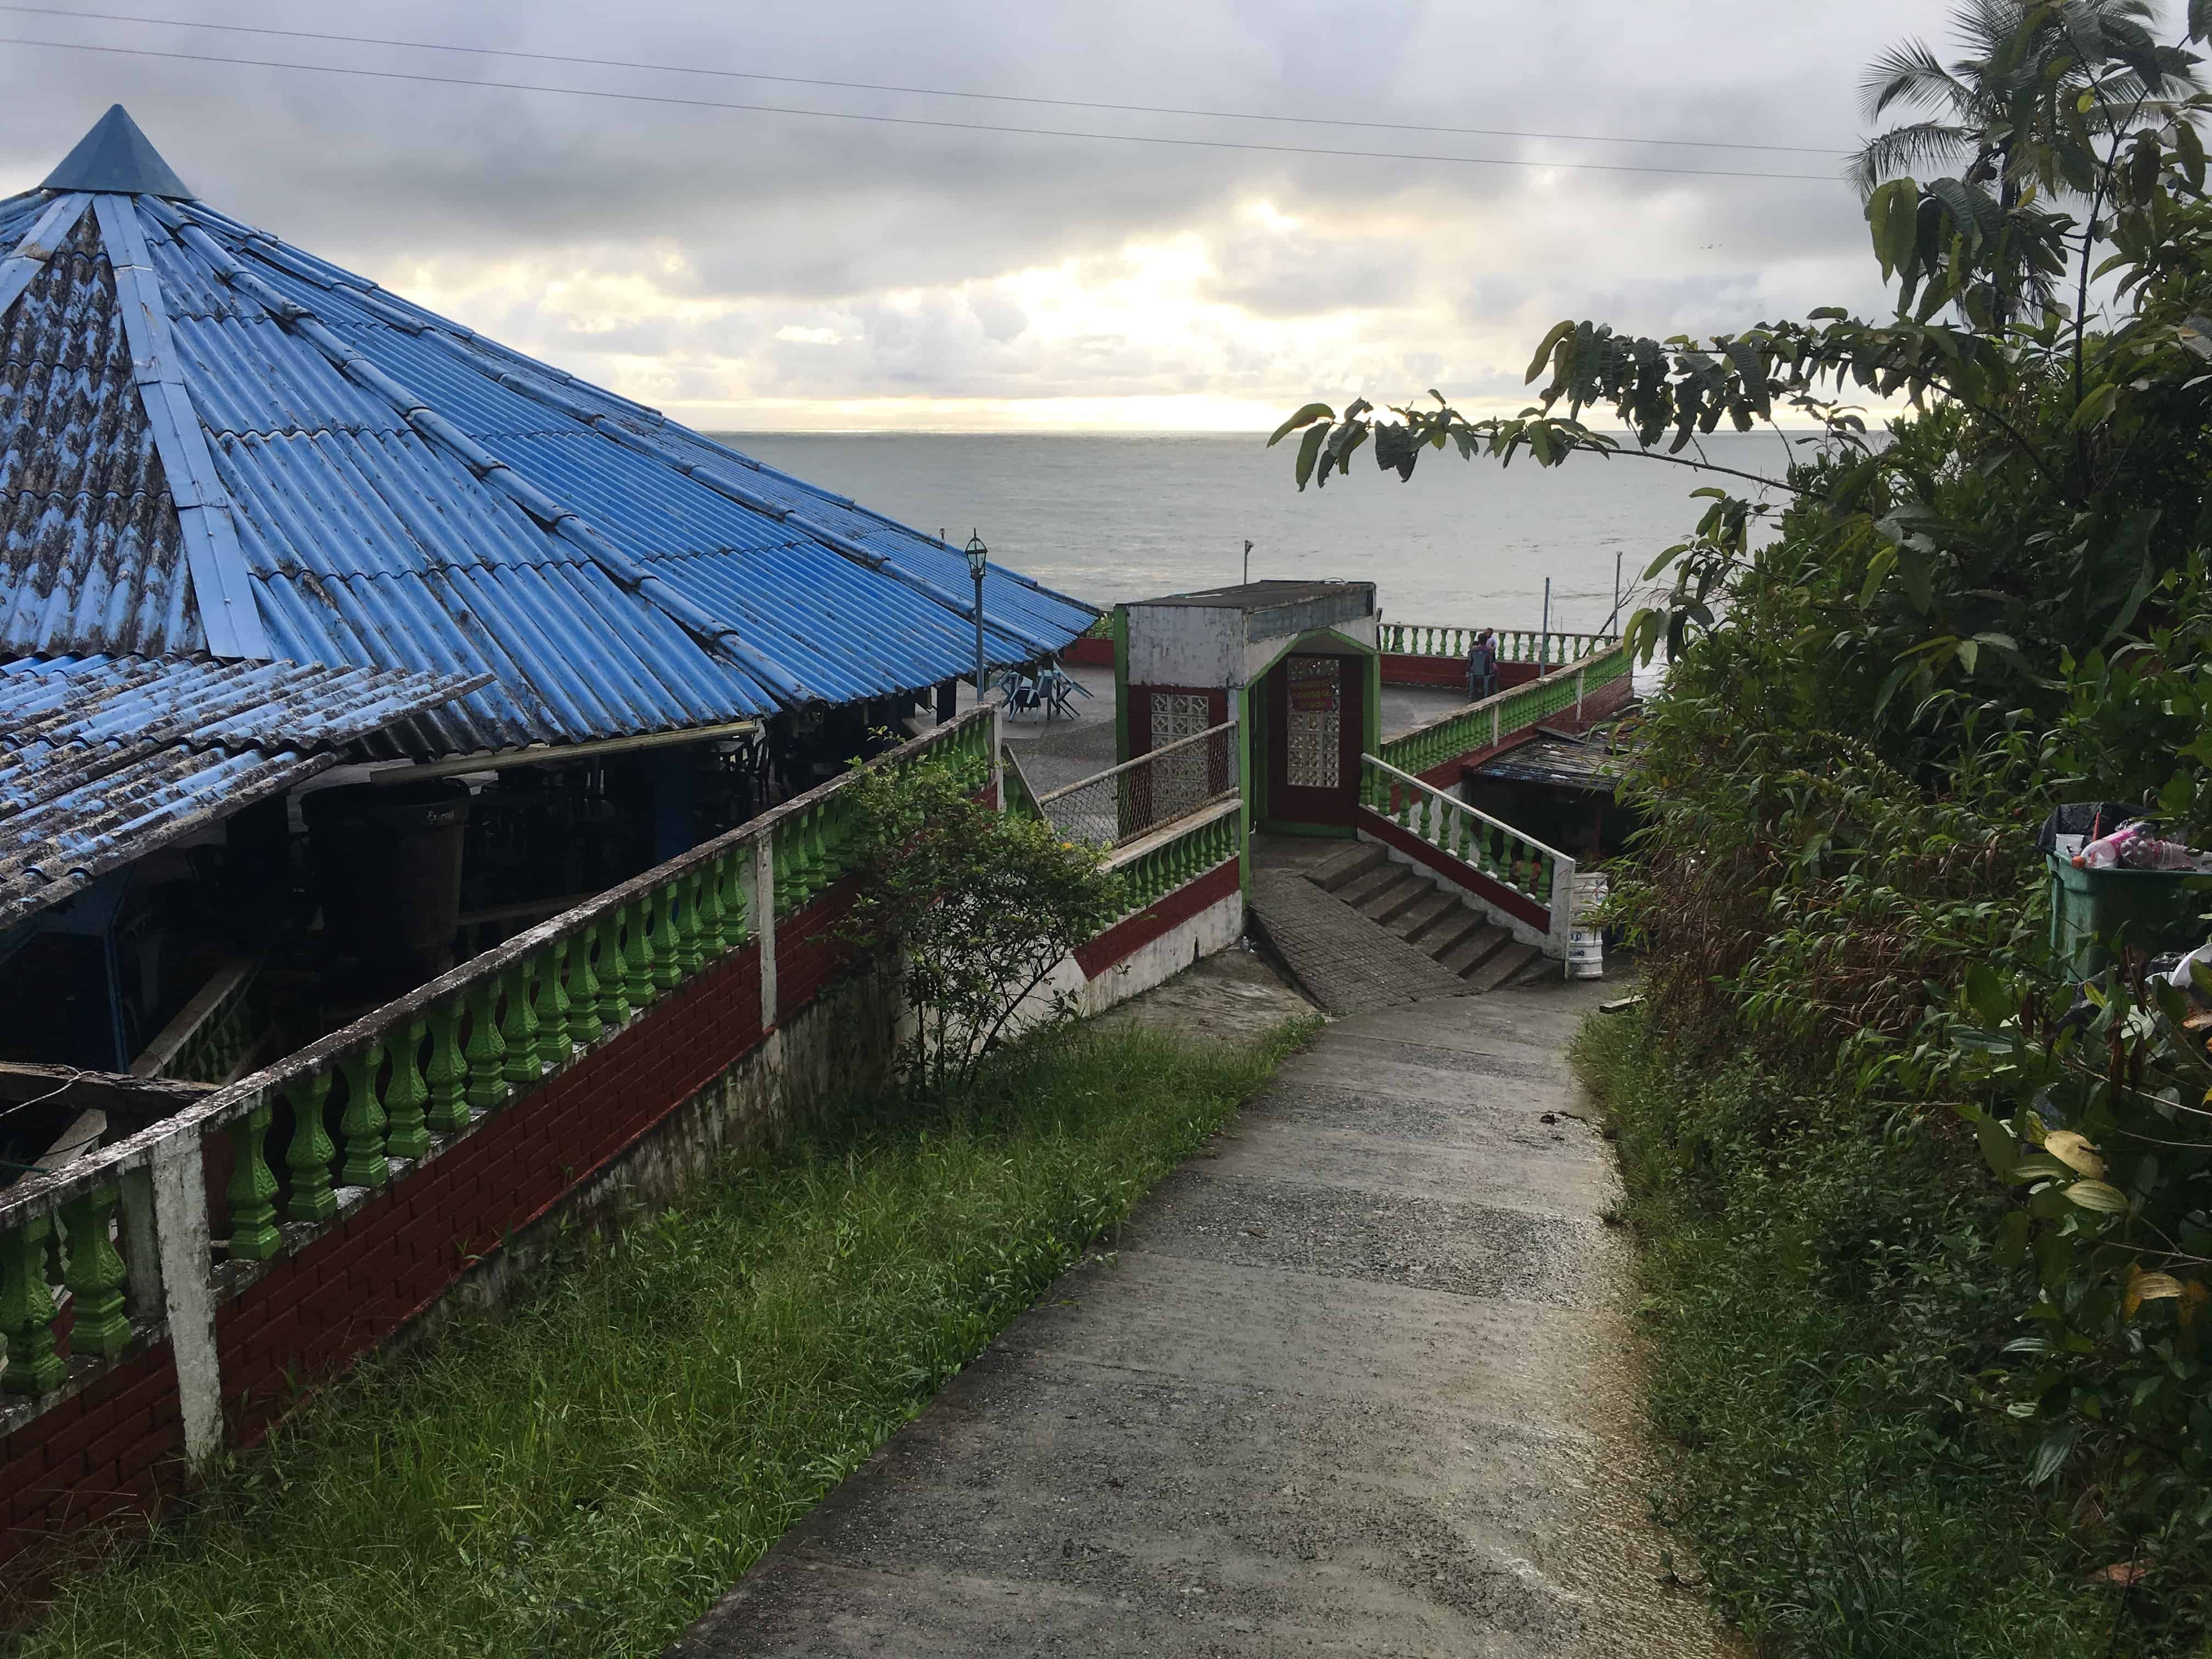 The path to the beach in Ladrilleros, Valle del Cauca, Colombia